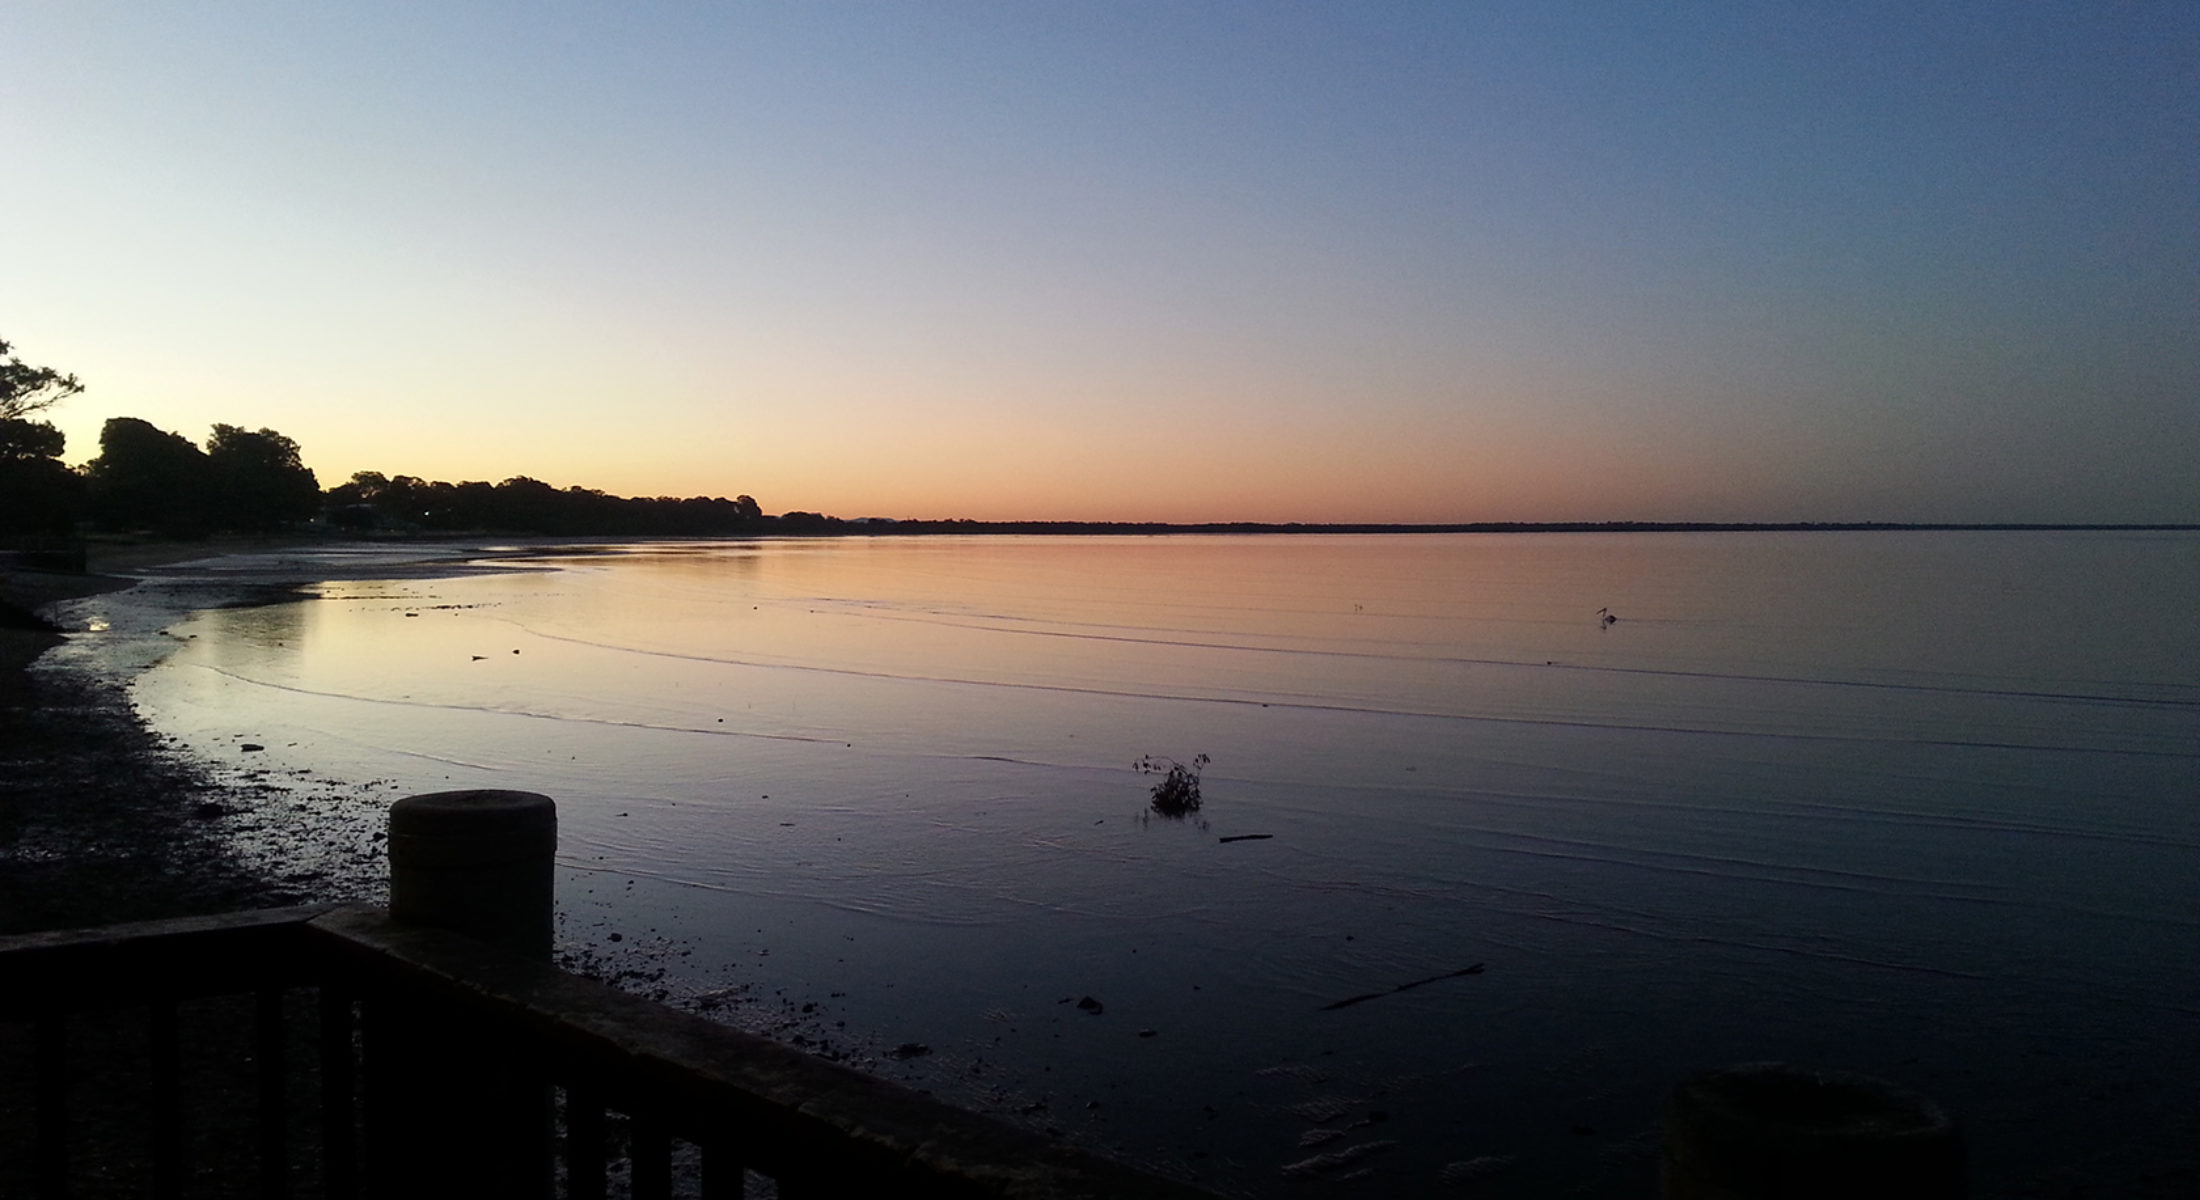 Deception Bay is a lovely spot to watch the sunset over the Moreton Bay Marine Park